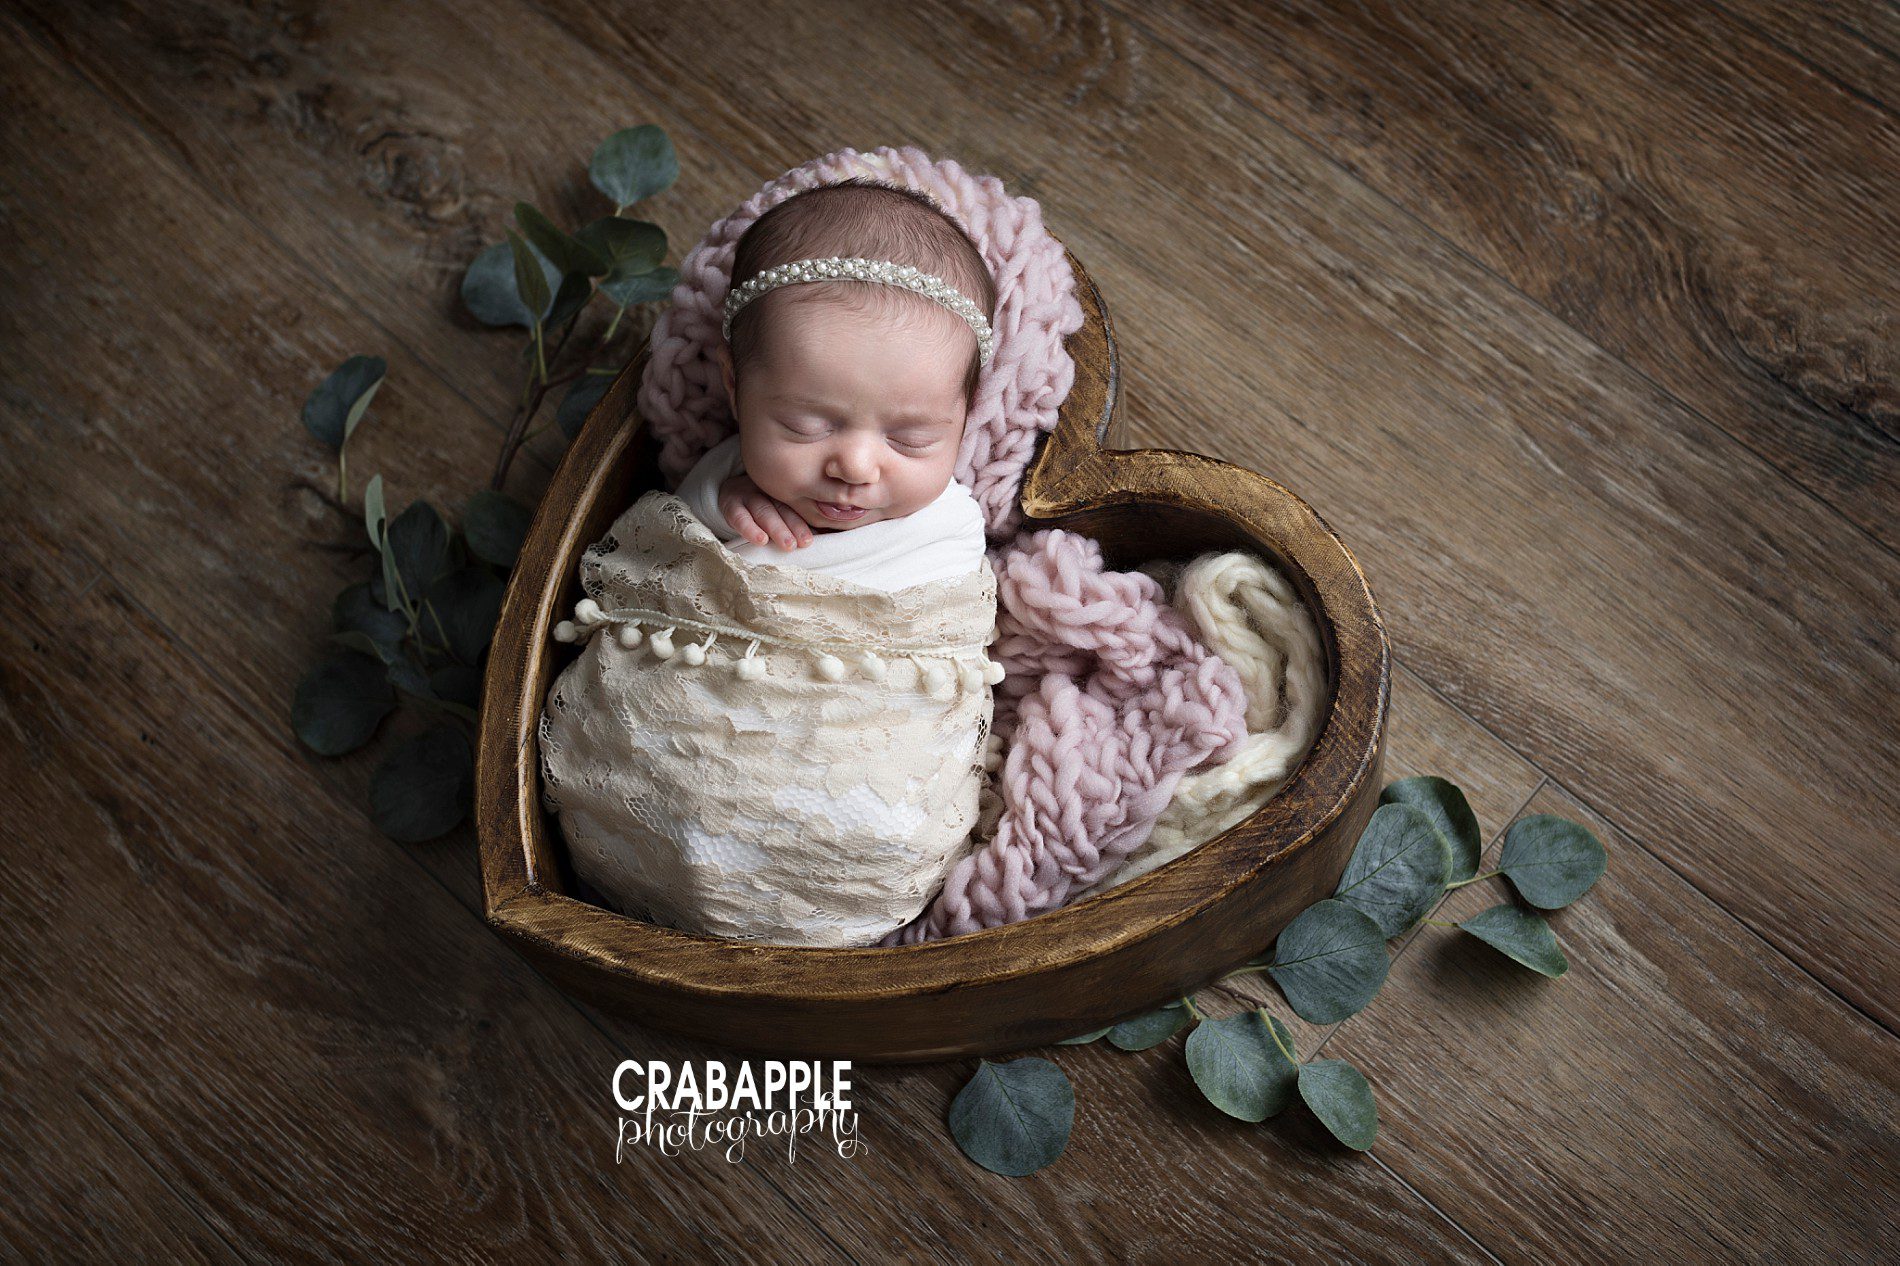 using props in newborn baby girl photos. Heart shaped wooden bowl for new baby photos. Faux eucalyptus leaves, lace, and chunky knit blankets.